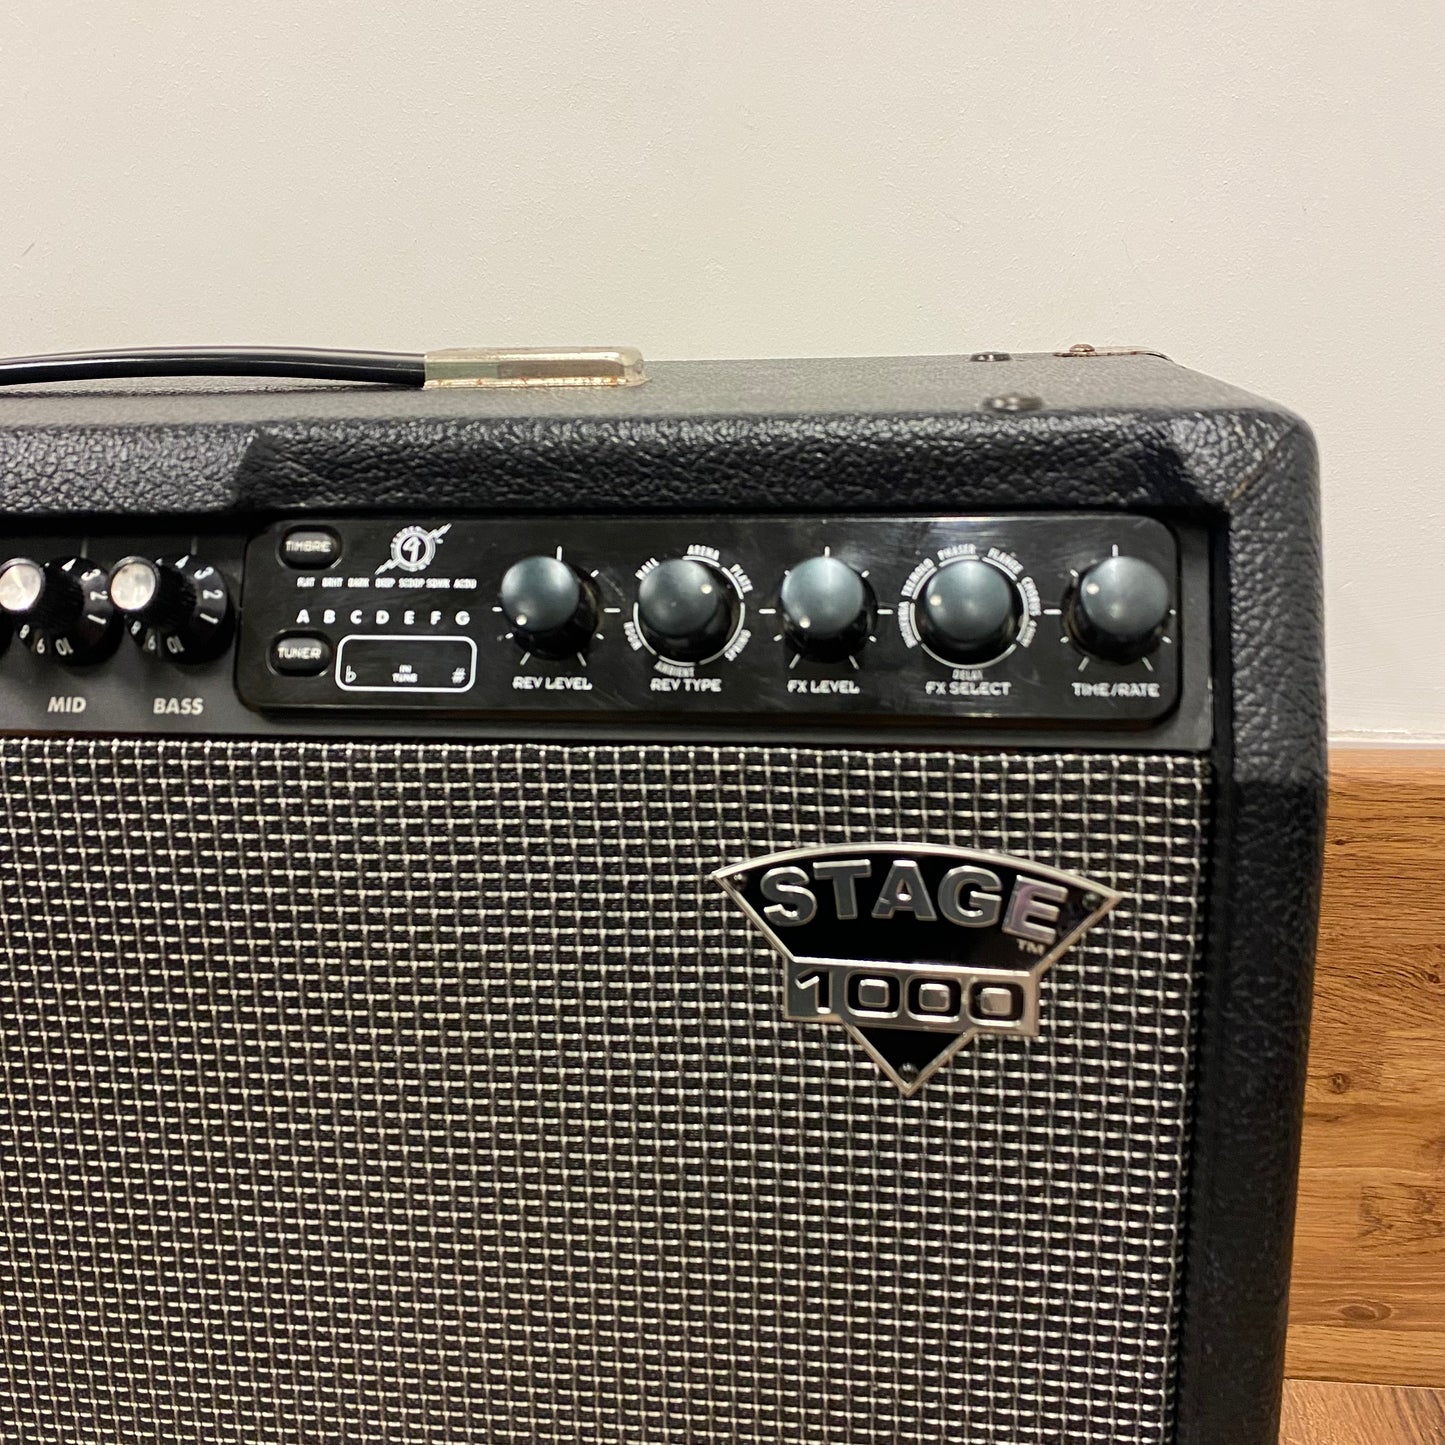 Pre-Owned Fender Stage 1000 Guitar Combo Amplifier